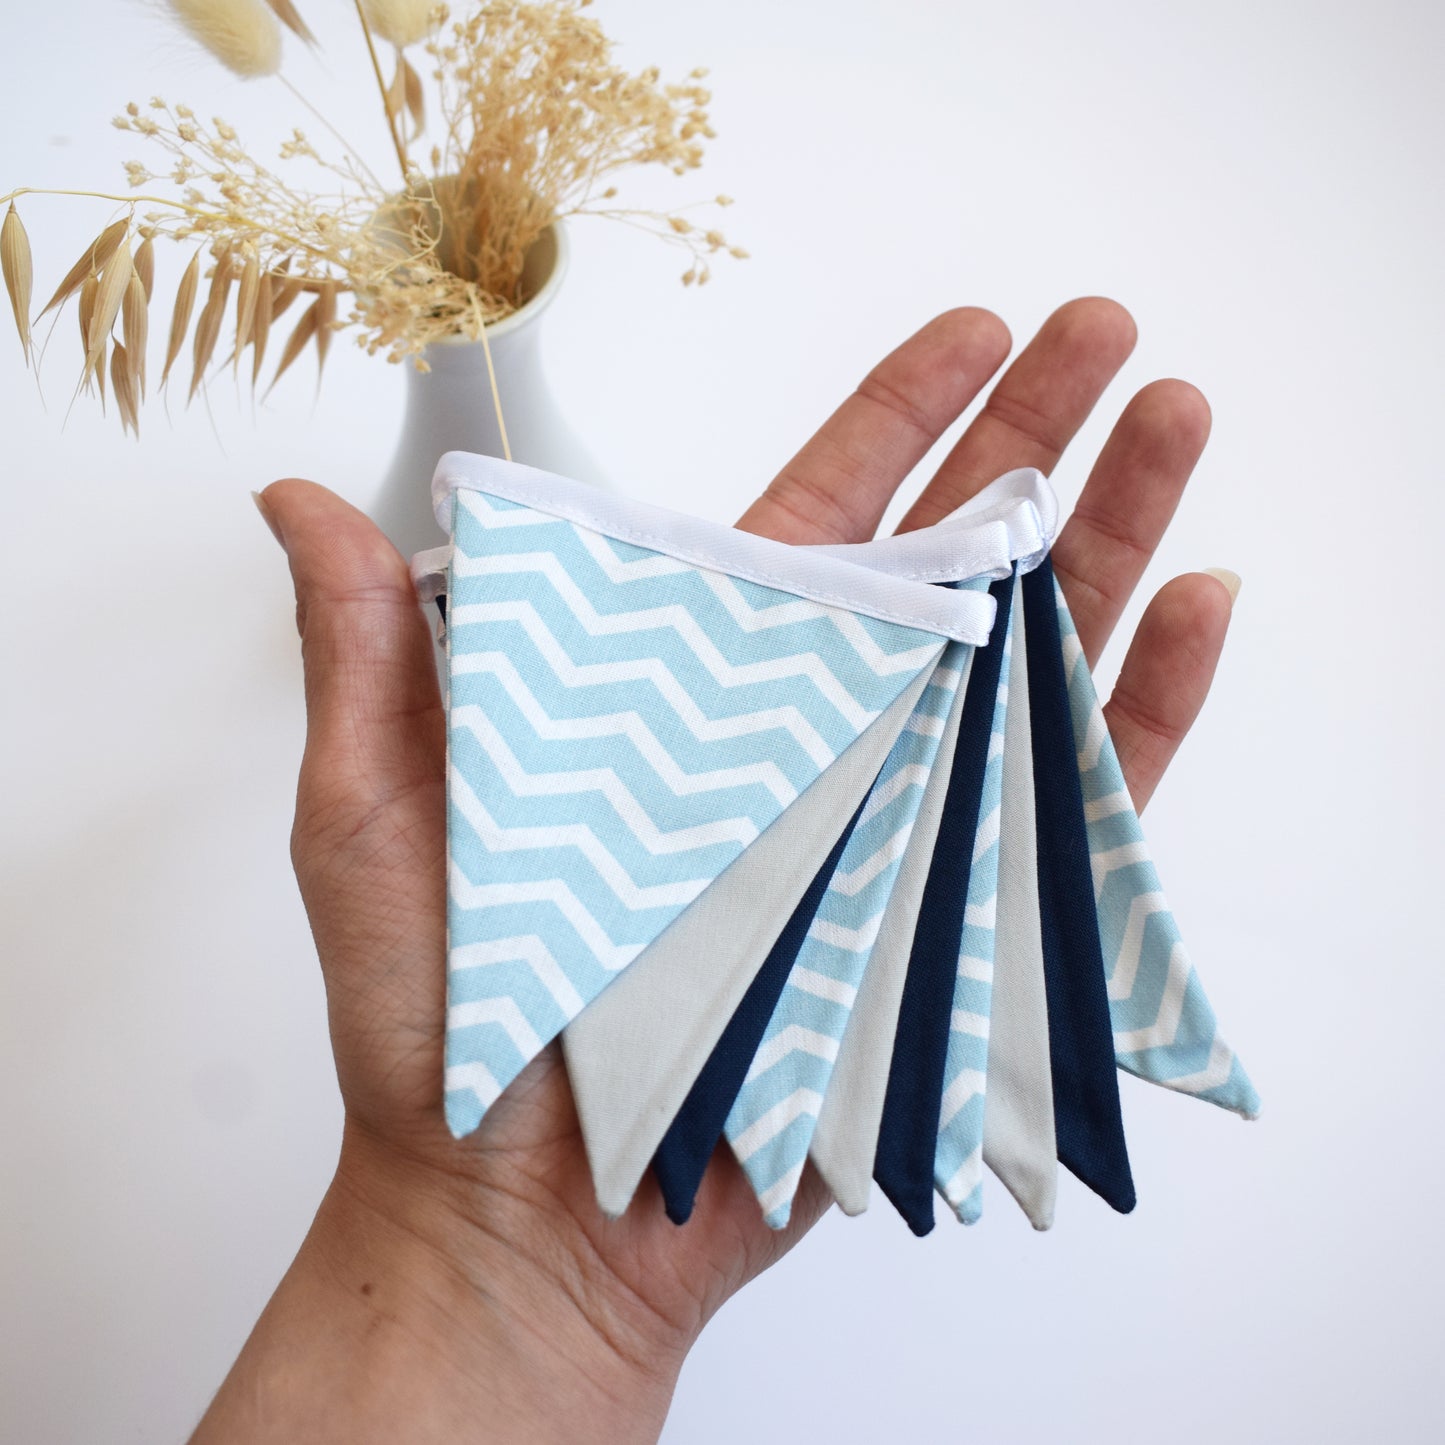 Blue Chevron, Navy Blue and Grey Bunting